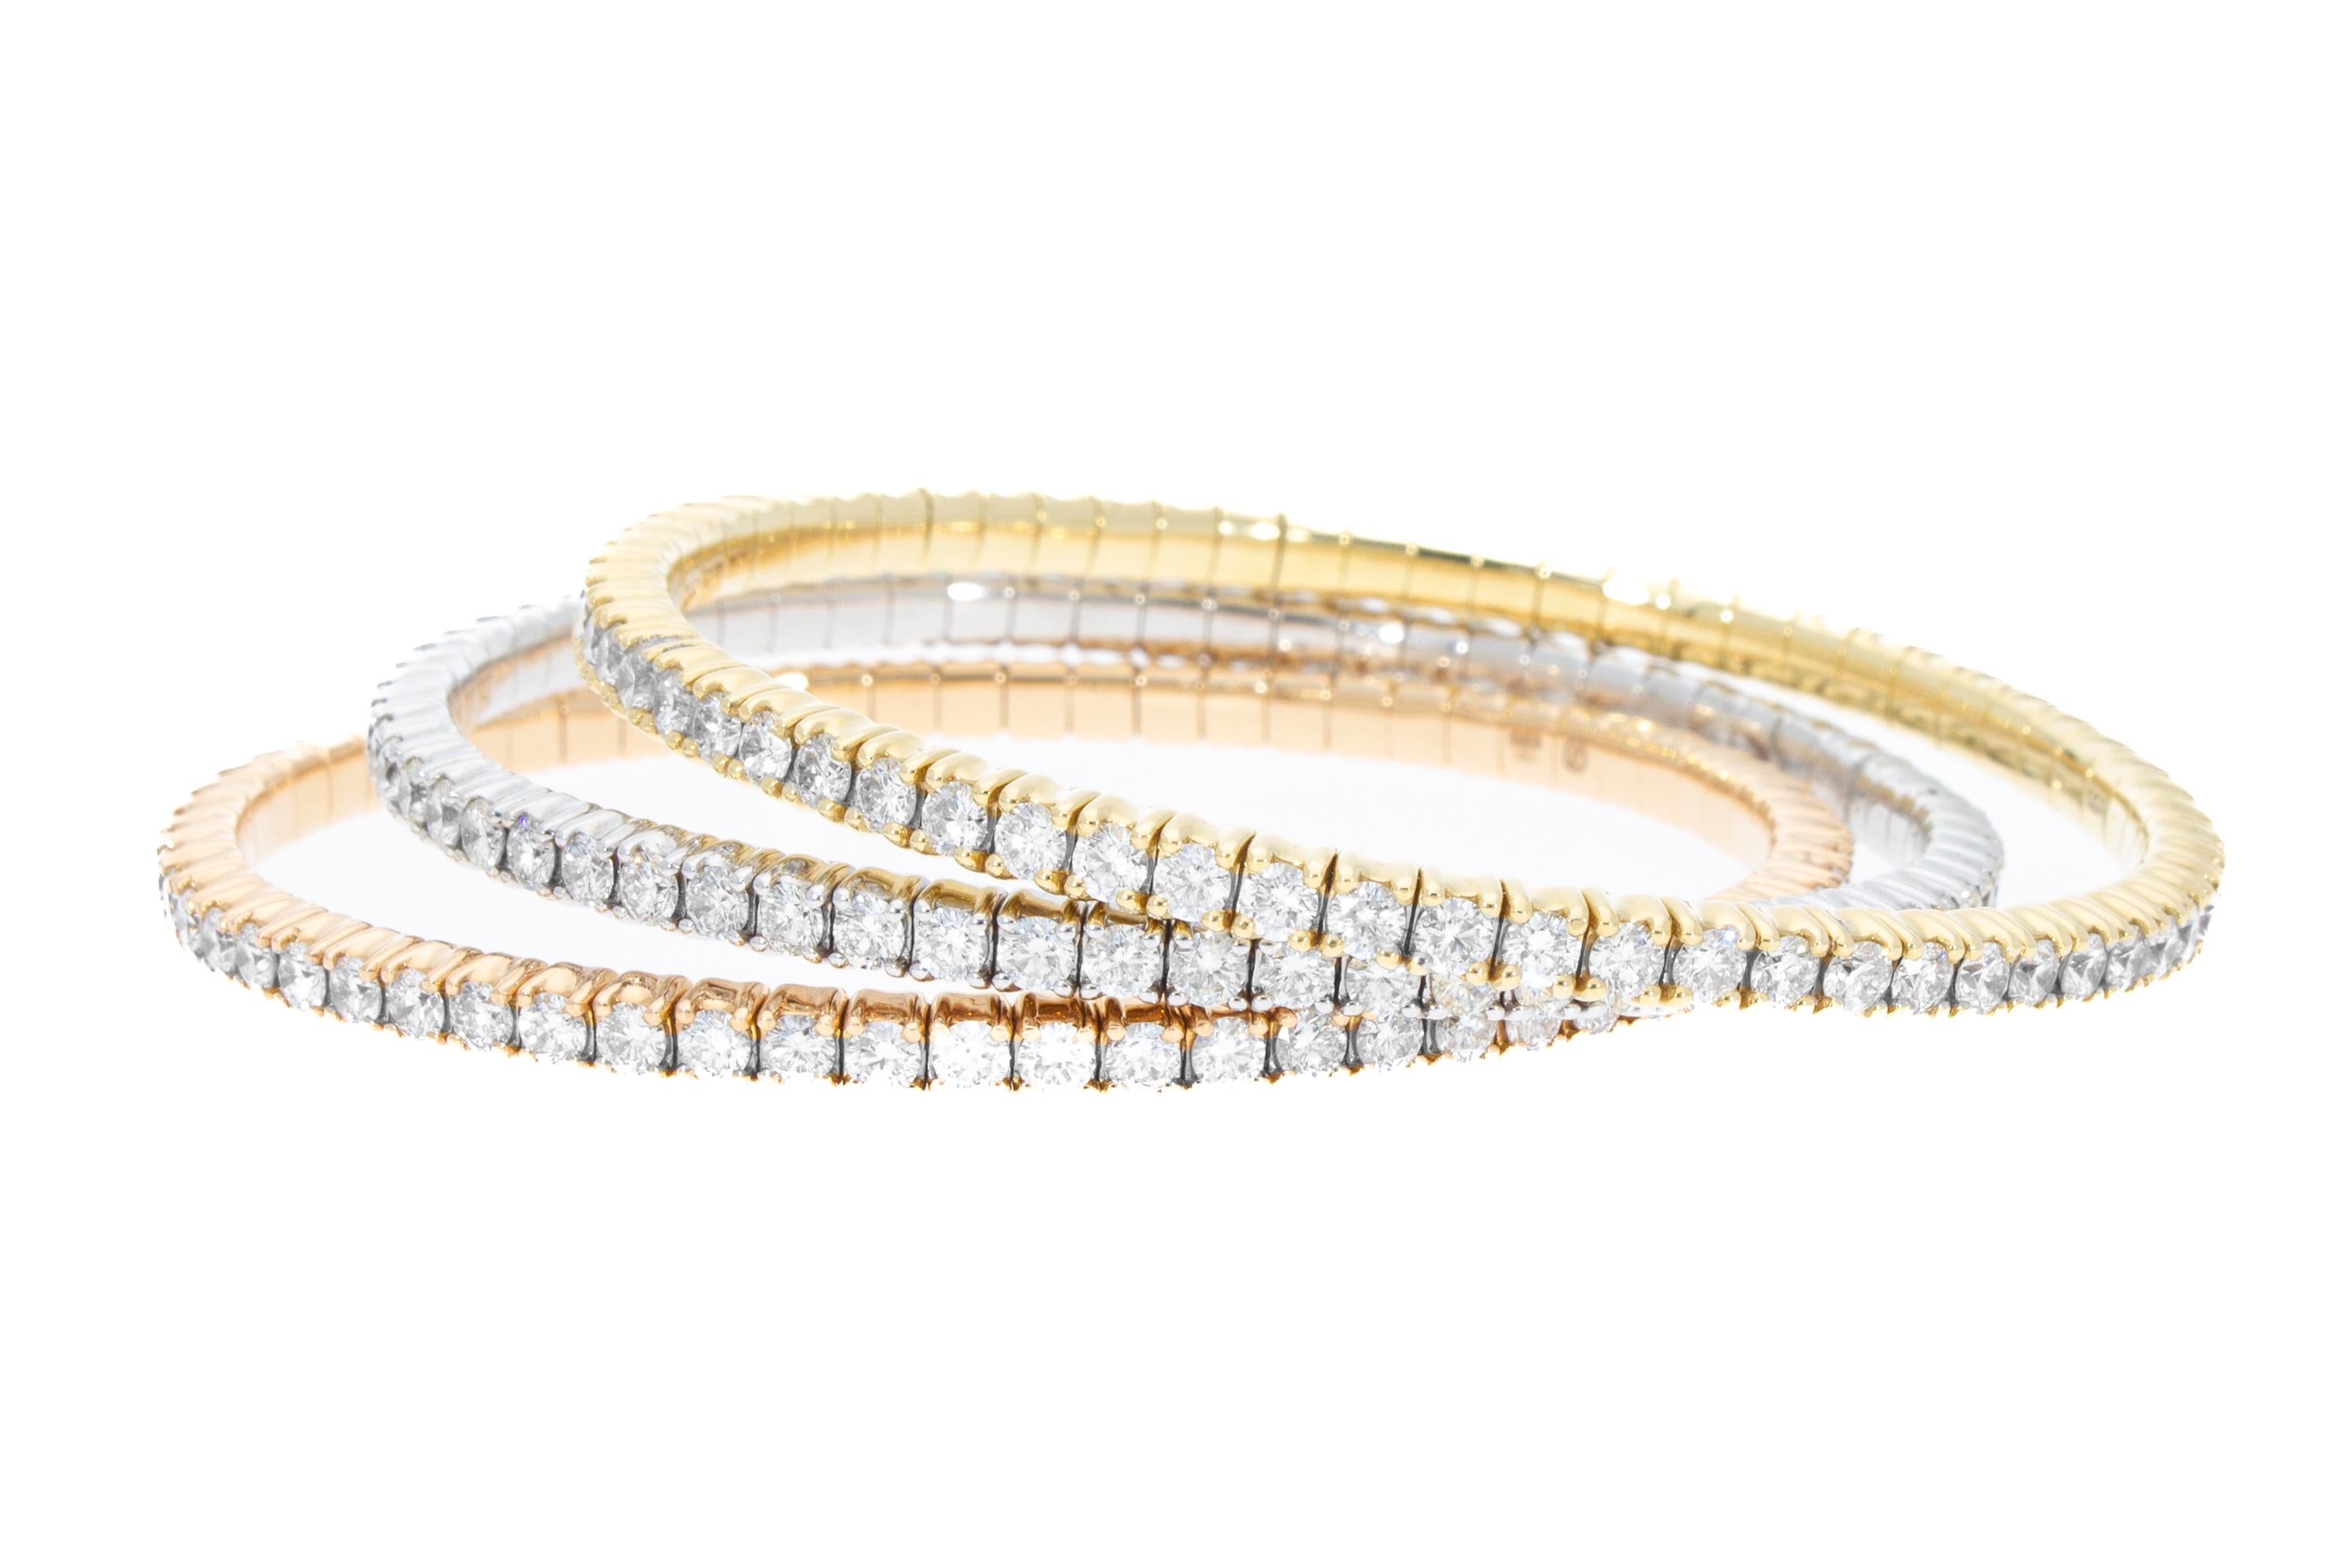 Carat 4.30 Elastic Diamond Tennis Bracelet. Yellow Gold 18 Kt. Made in Italy. For Sale 8